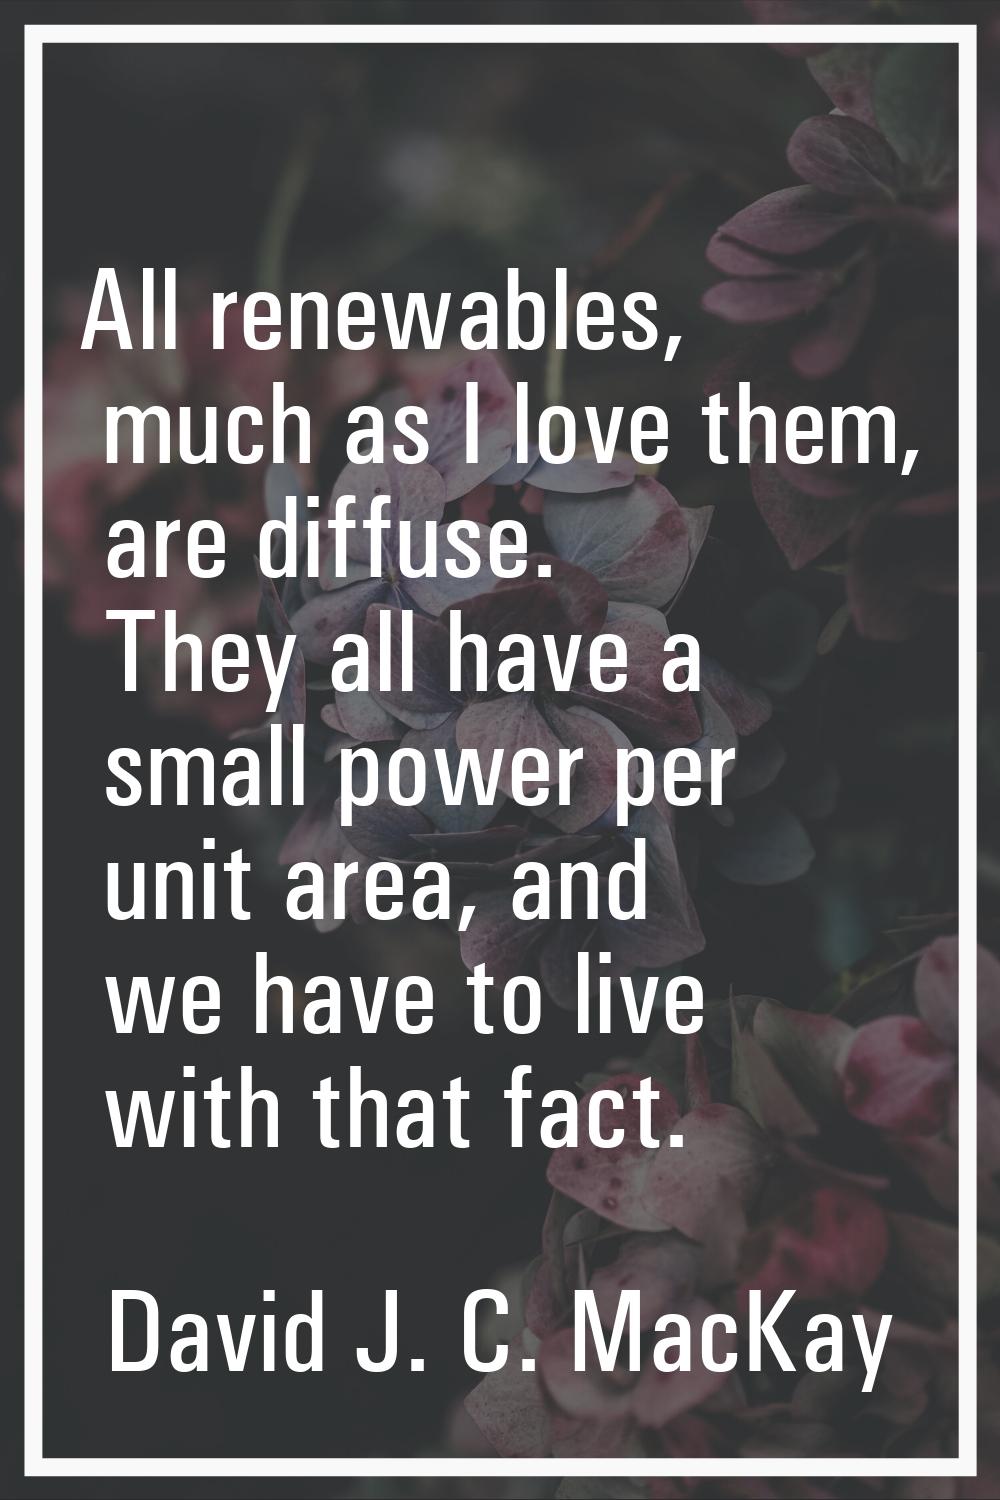 All renewables, much as I love them, are diffuse. They all have a small power per unit area, and we